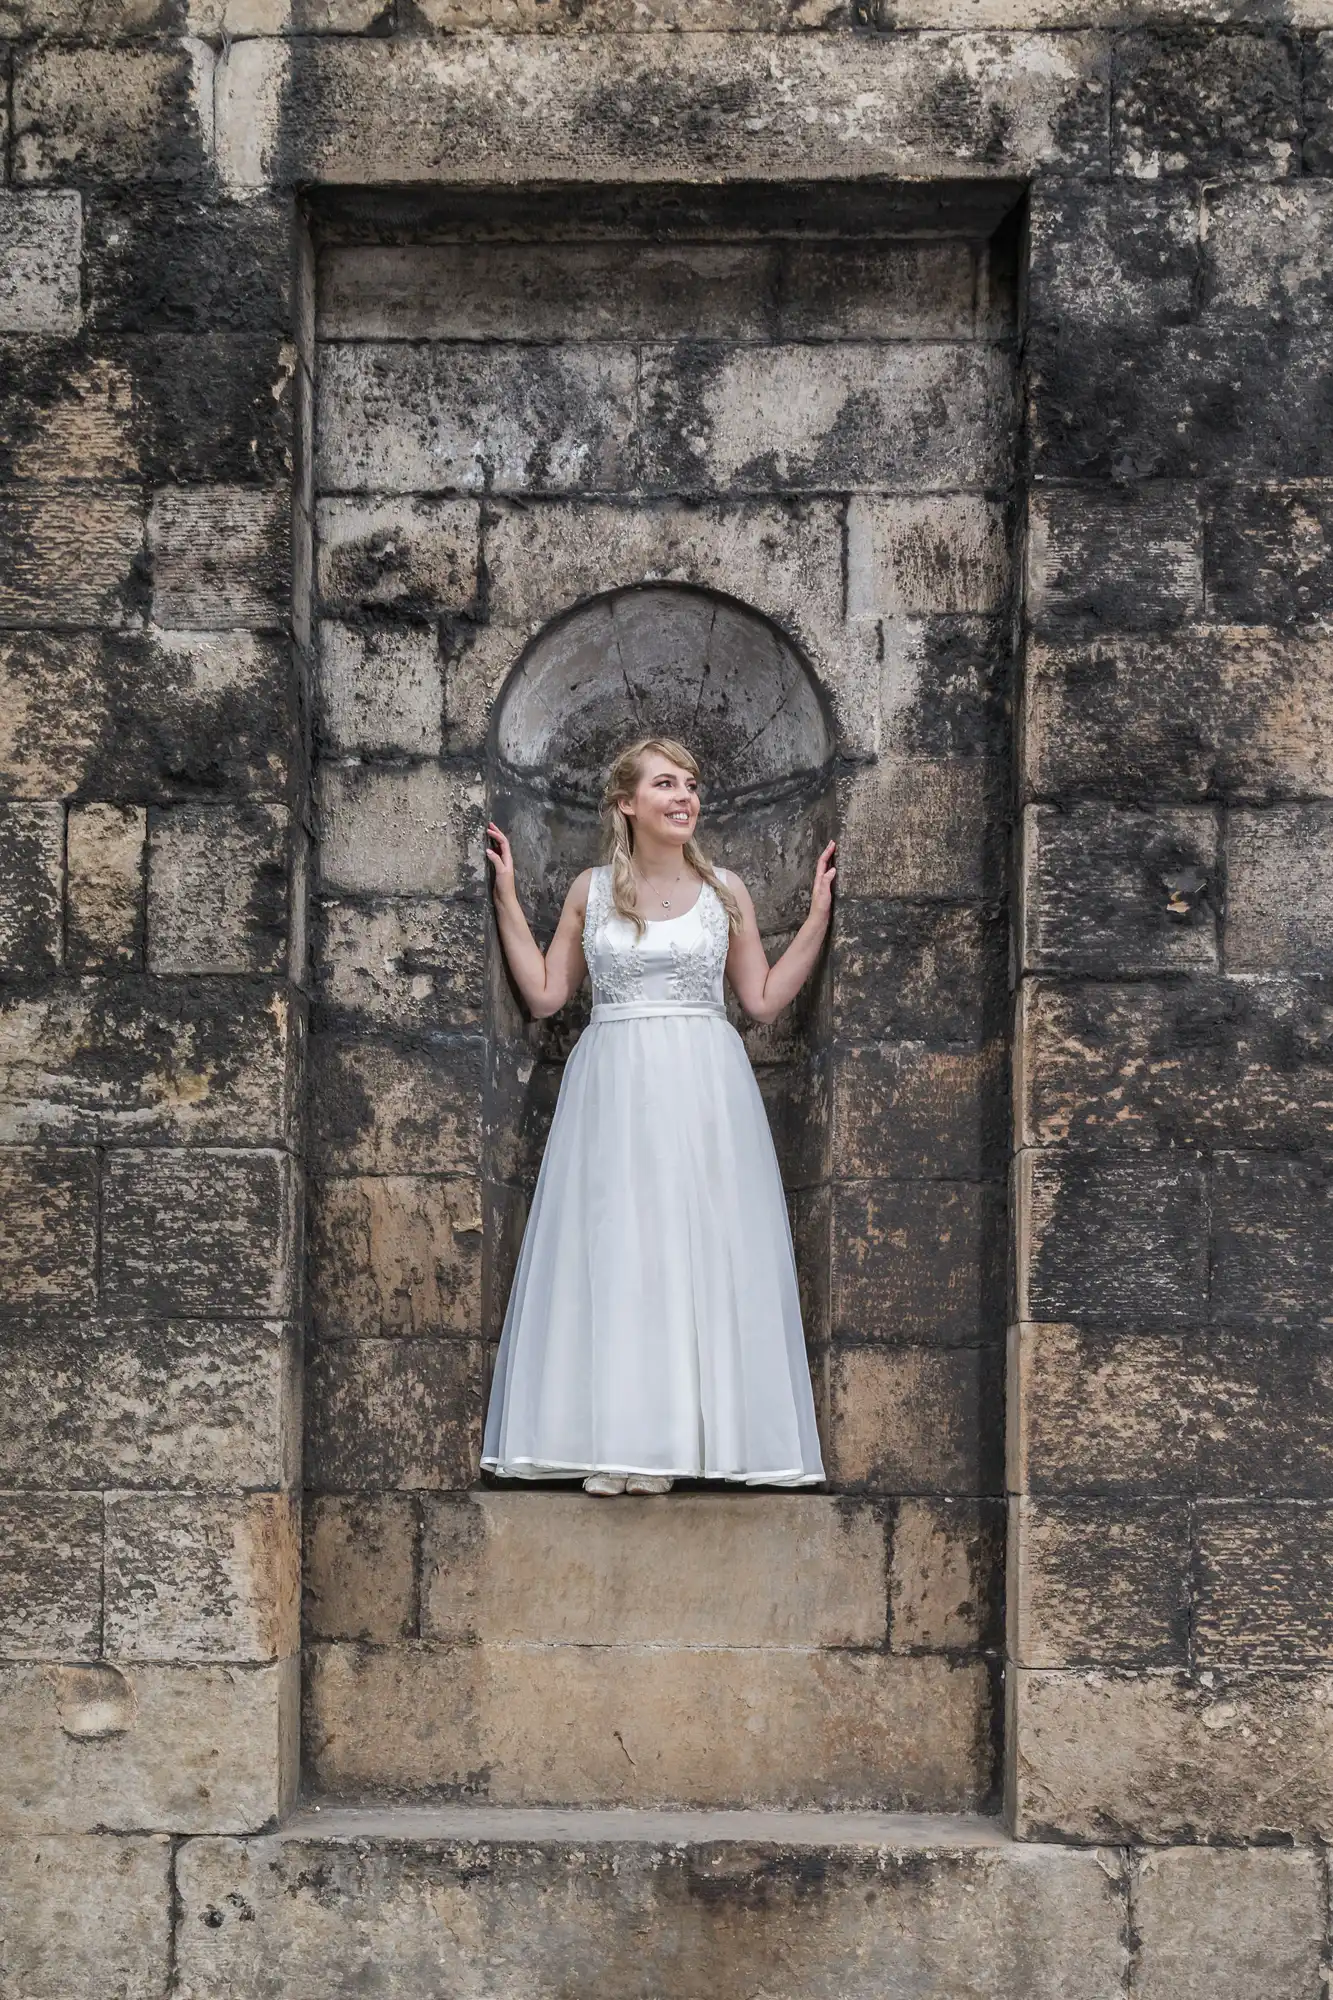 A woman in a white dress stands smiling in a large stone niche with her arms raised slightly, in an old textured wall.